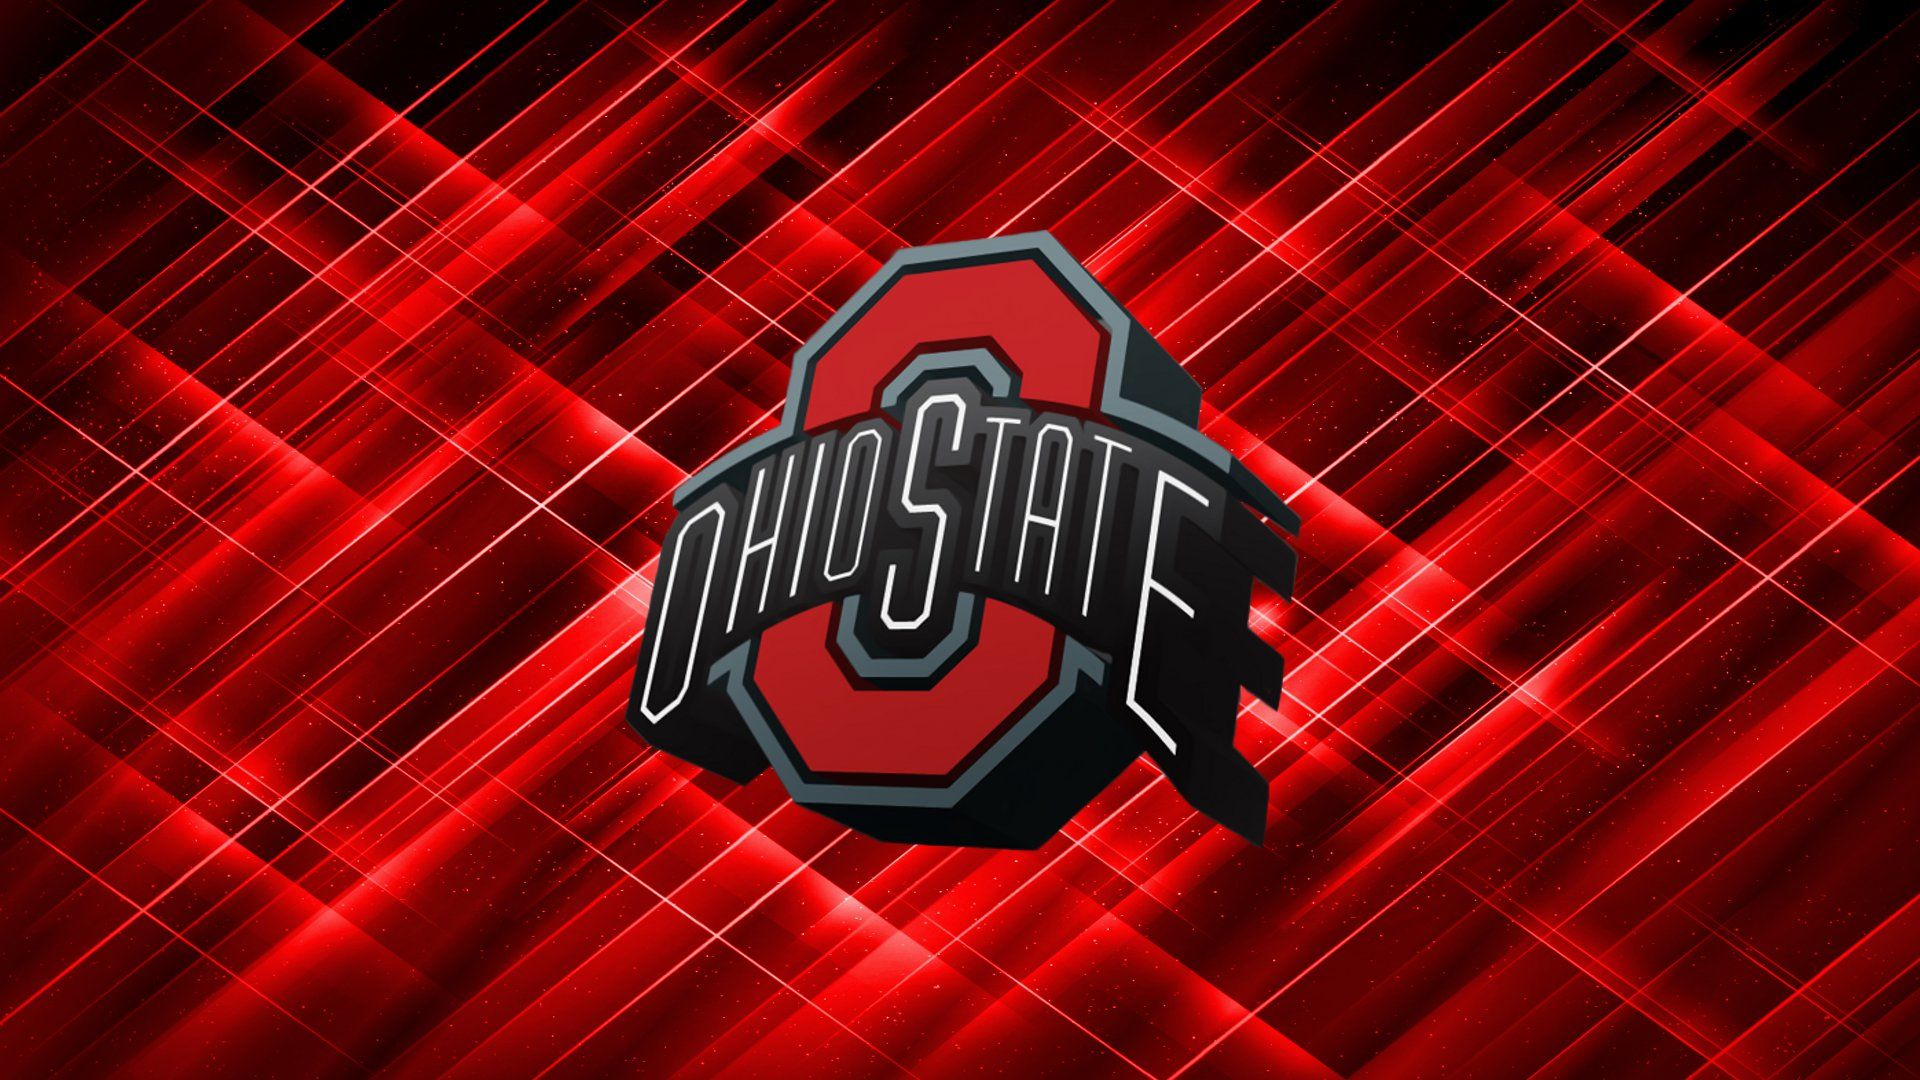 Ohio State background desktop | Wallpapers, Backgrounds, Images ...